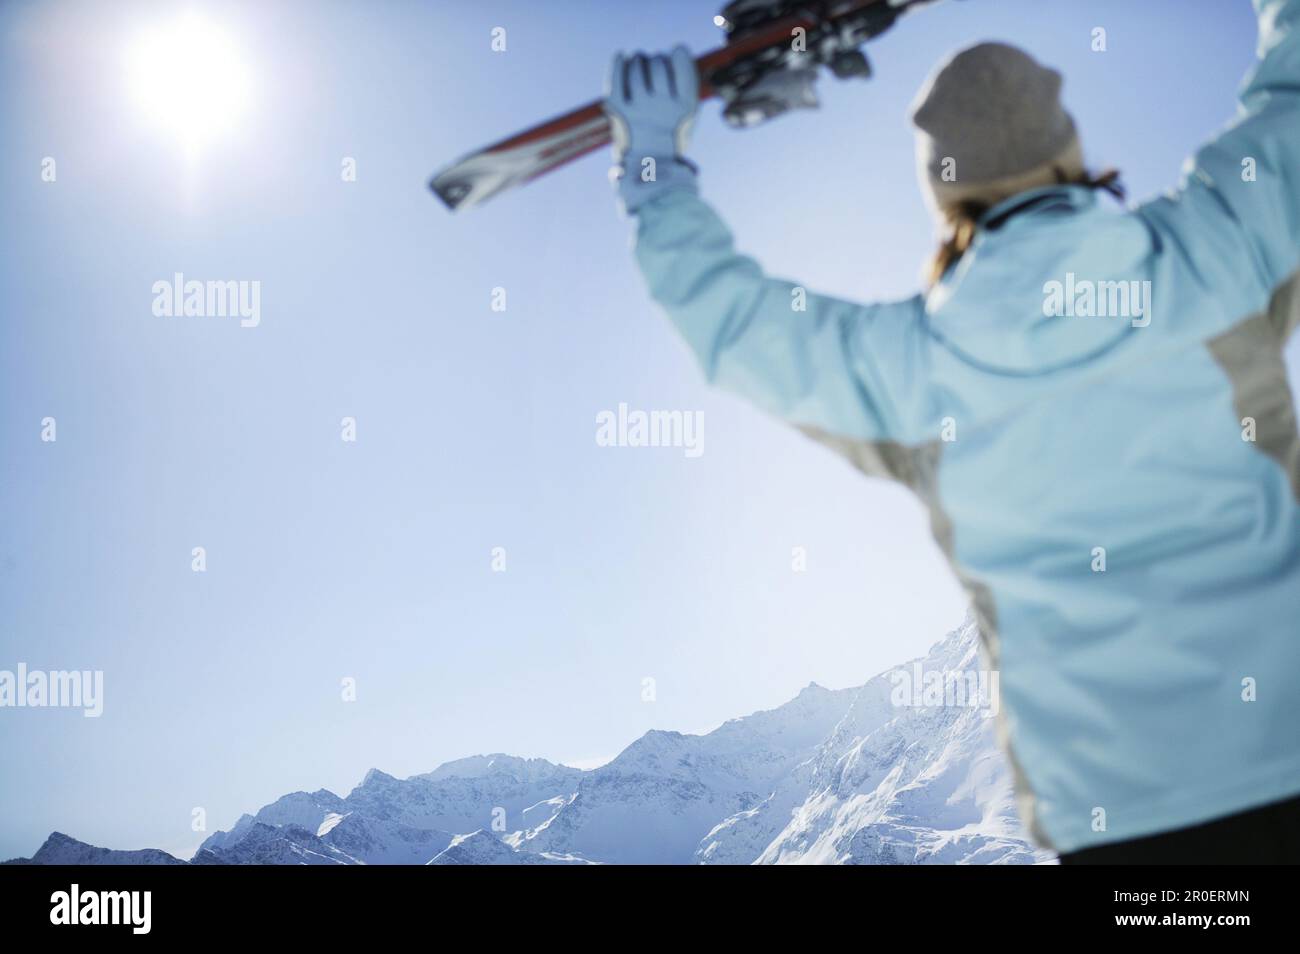 Woman holding skis up, mountains Hohe Mut and Gaisskogel in background, Kuhtai, Tyrol, Austria Stock Photo